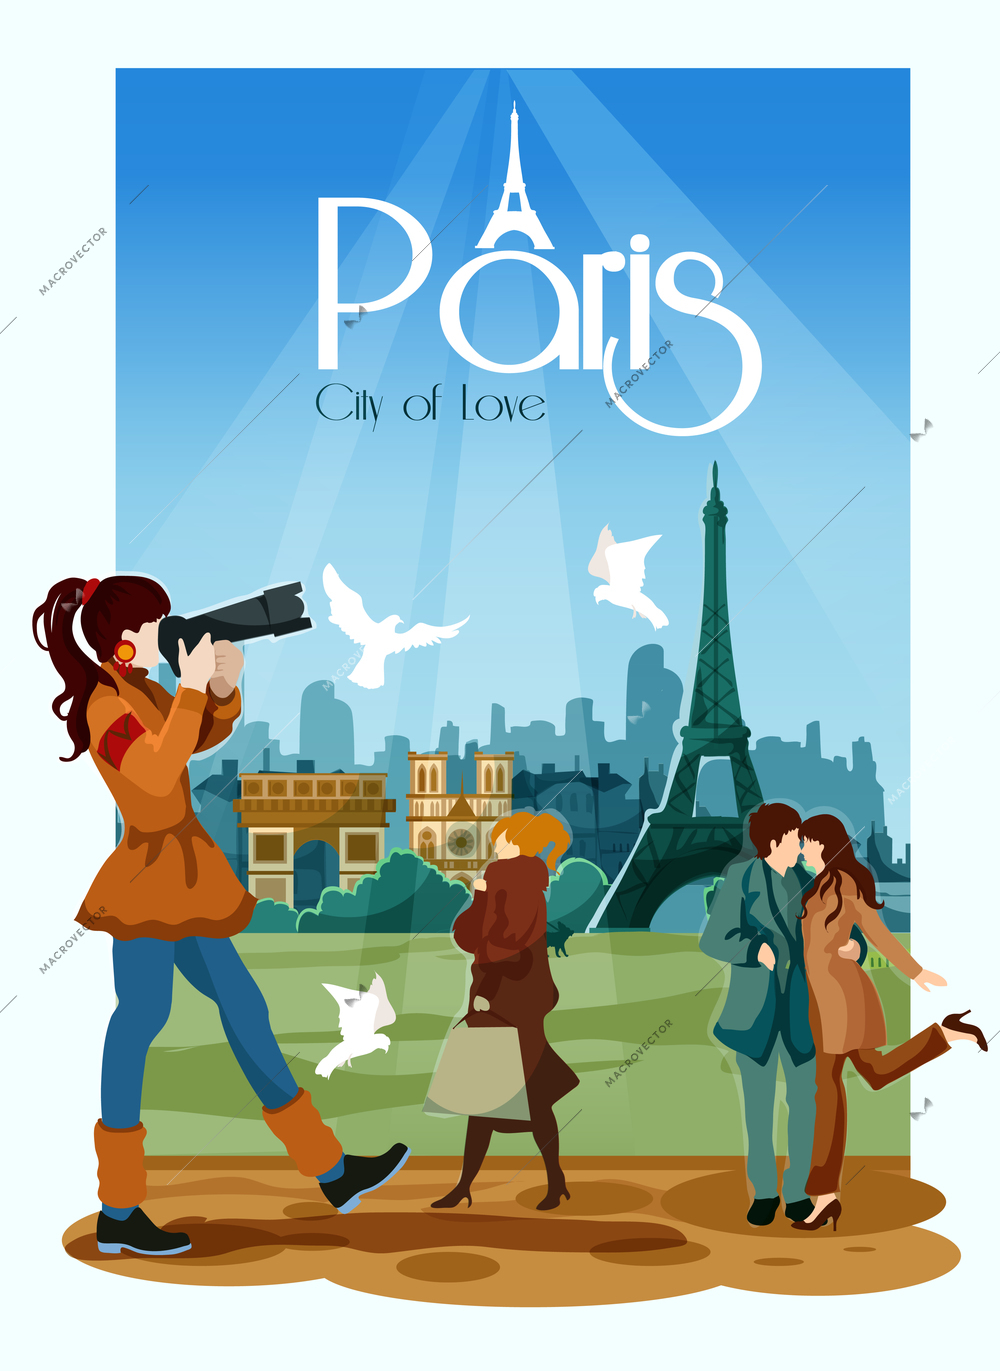 Paris poster with touristic landmarks people and city of love text vector illustration